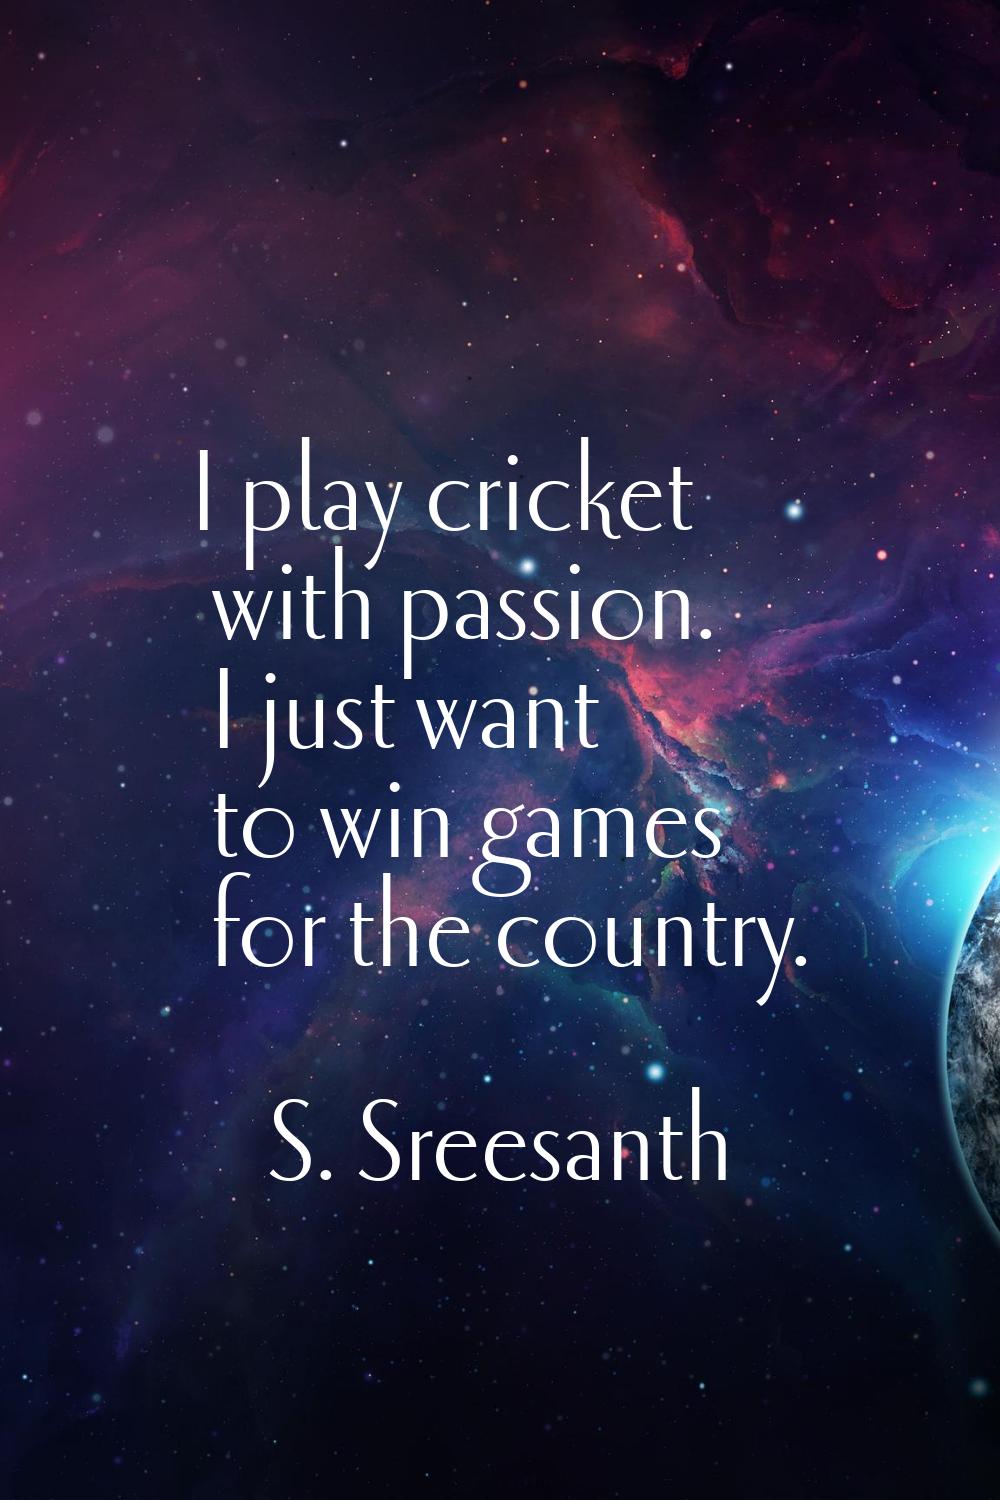 I play cricket with passion. I just want to win games for the country.